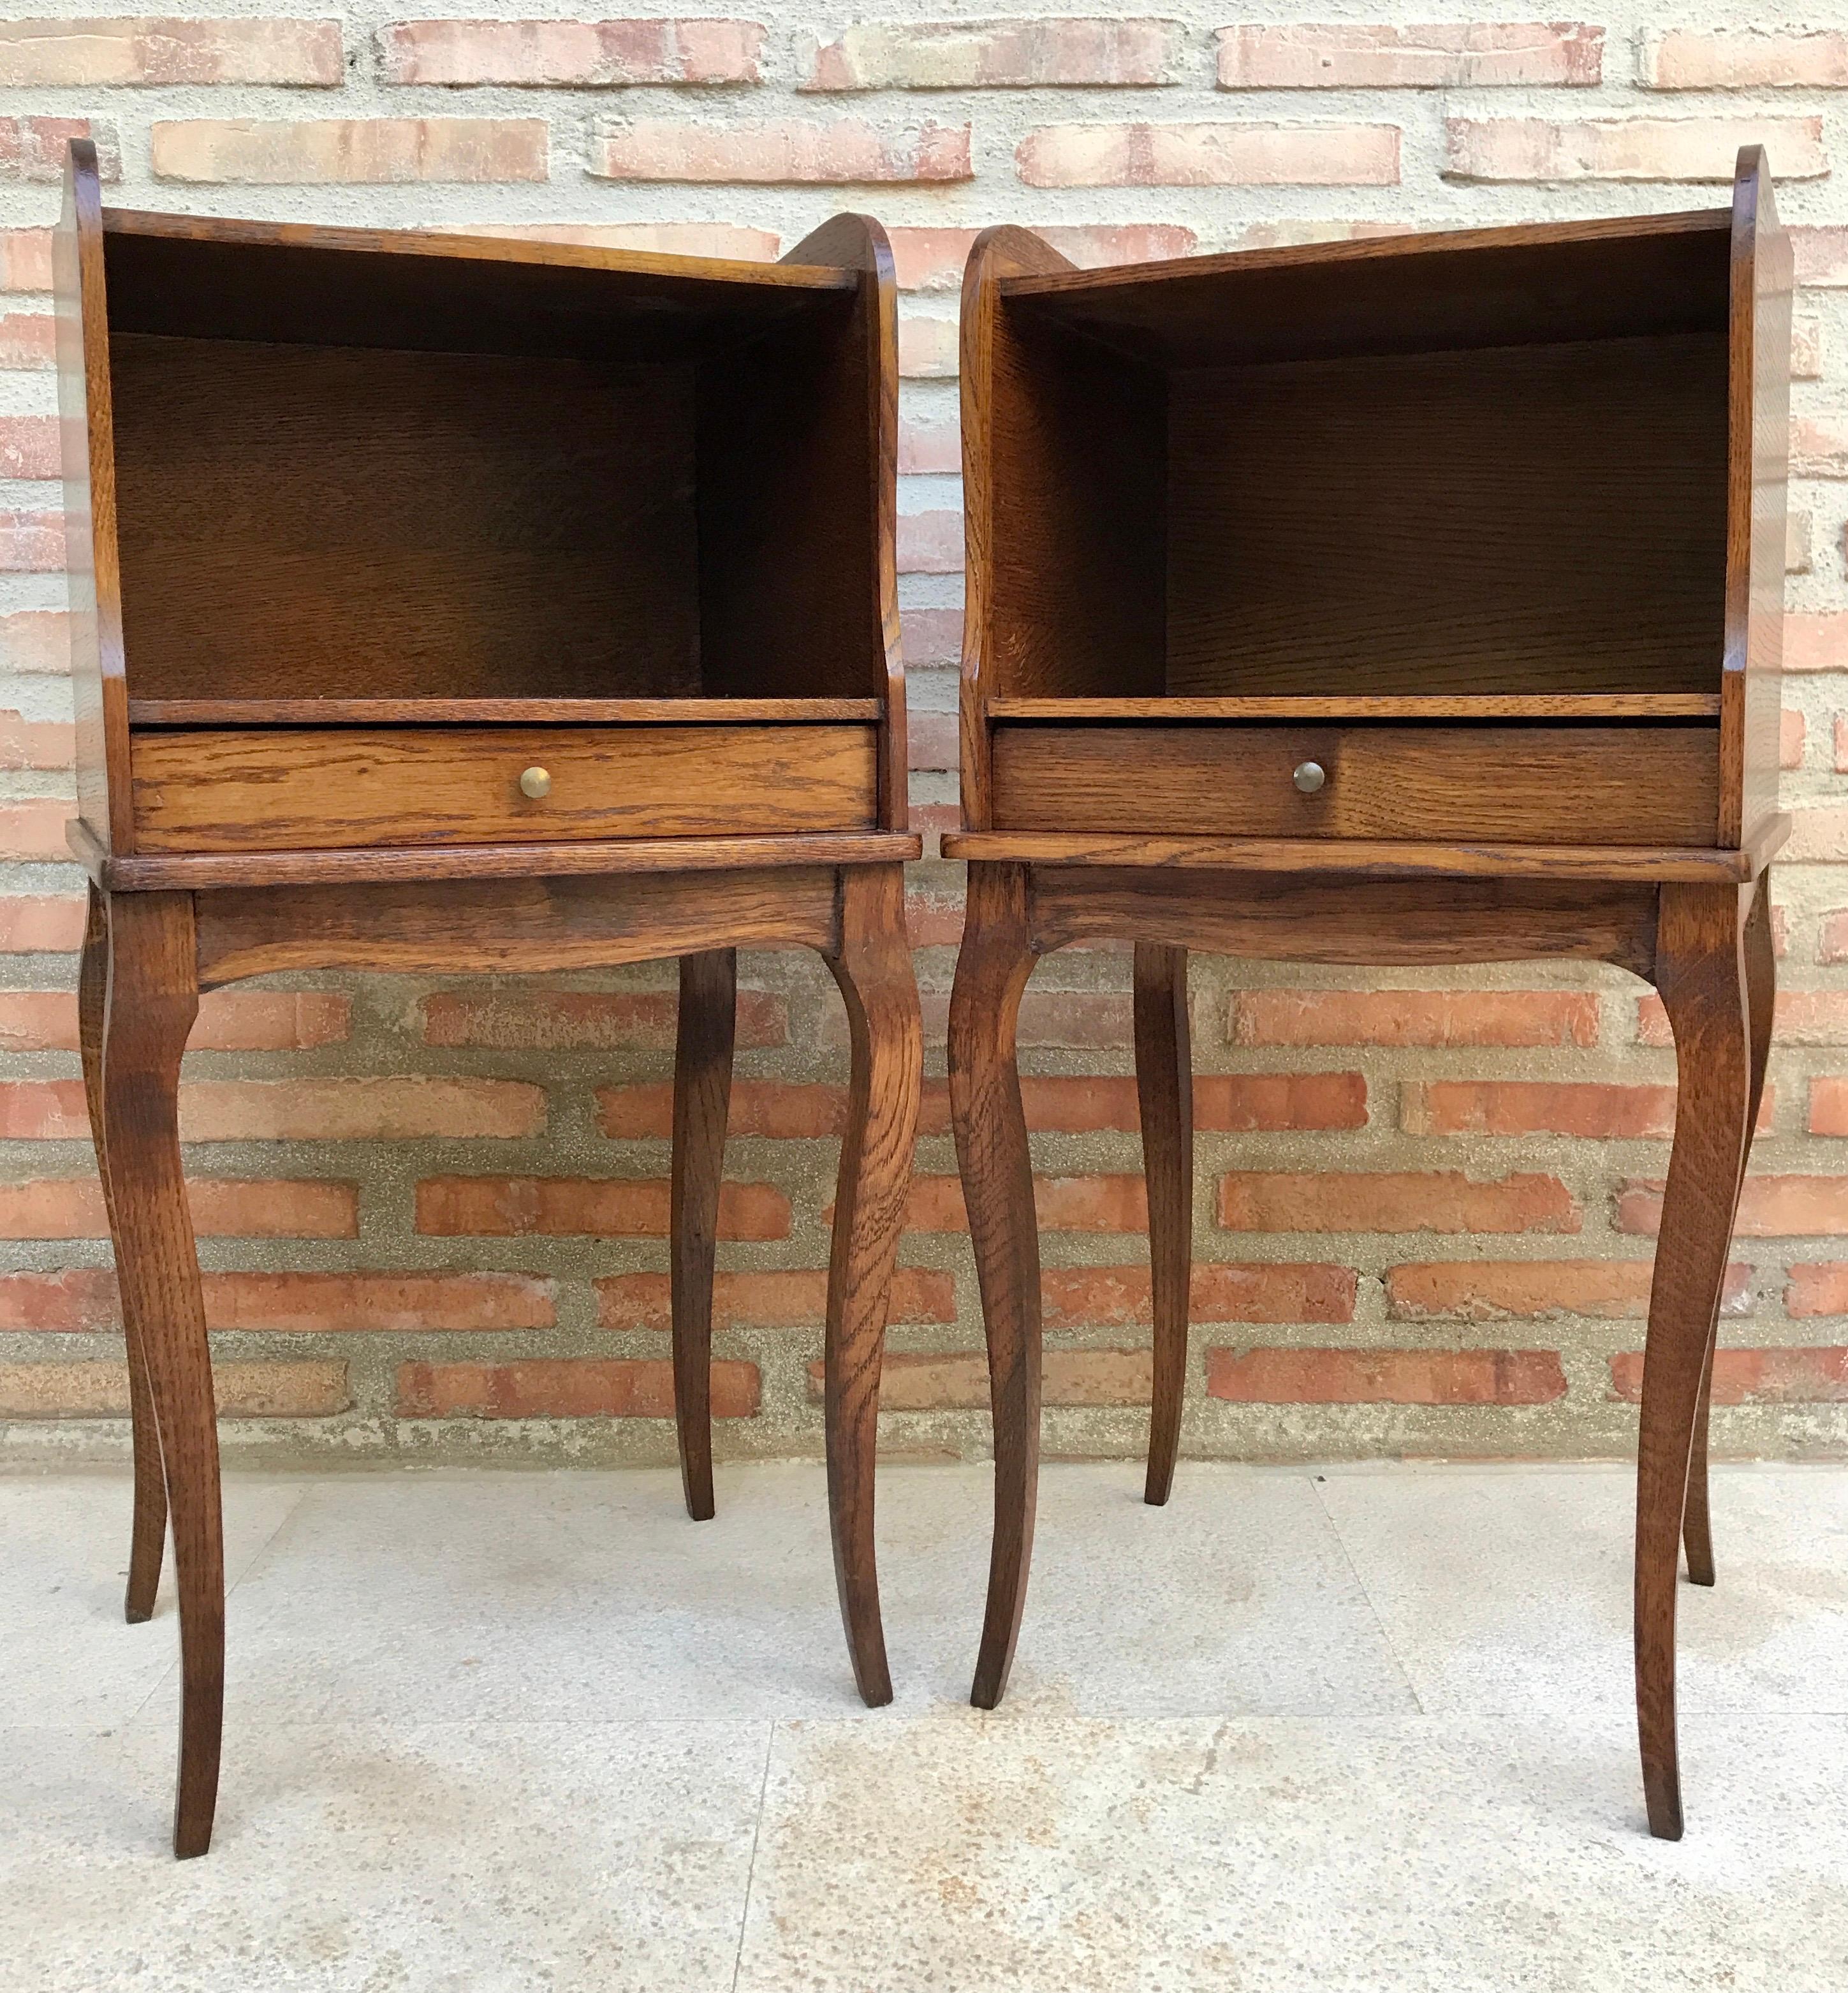 Elegant pair of coffee tables or bedside tables in antique Louis XV style from the 1960s, rare and fine in walnut. This pair of bedside tables has particularly slim legs. In the front they have a comfortable drawer and an open shelf. Pair of really